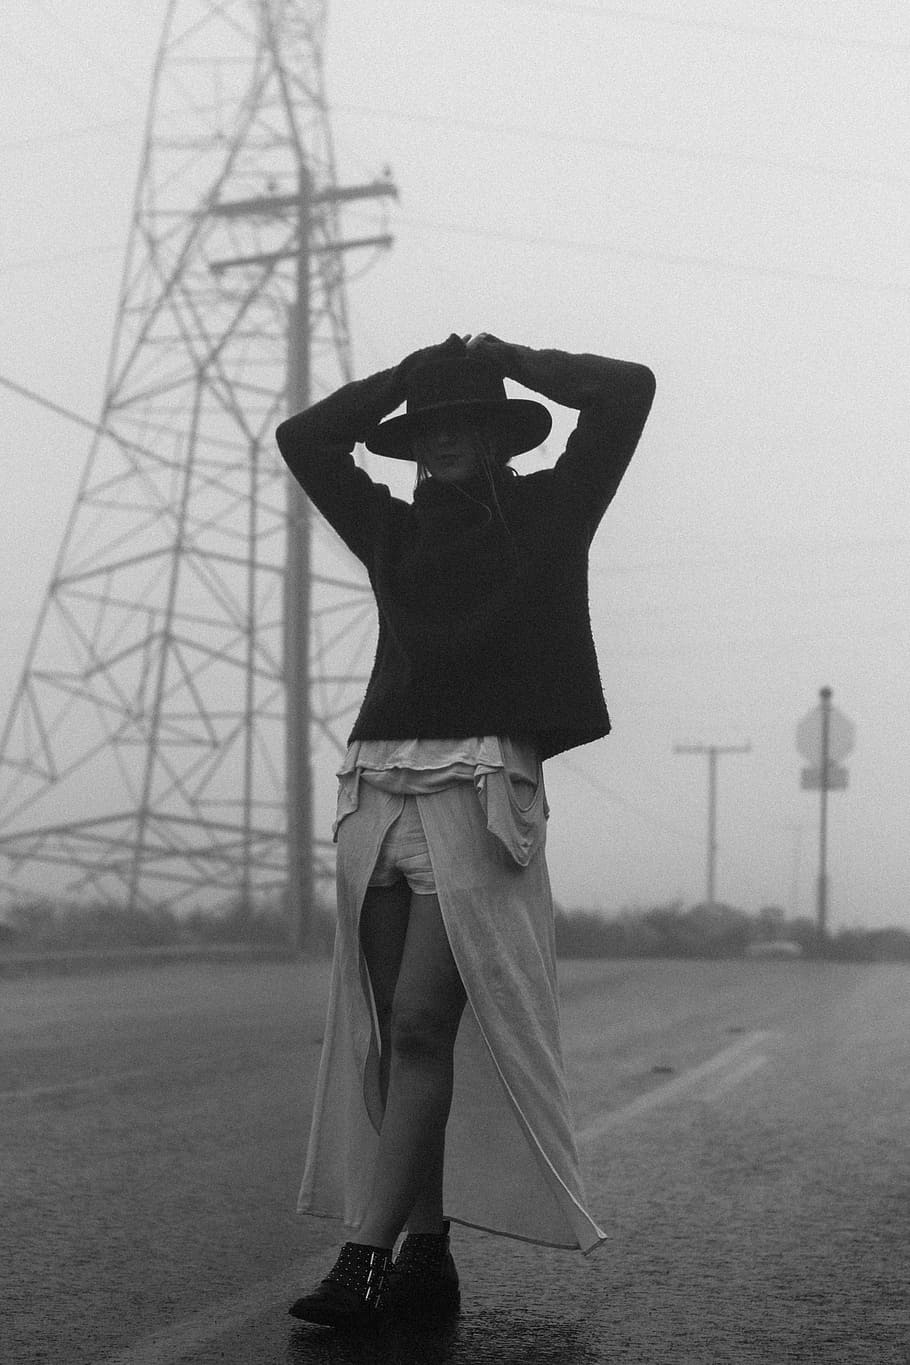 HD wallpaper: greyscale photo of person standing on road, vogue